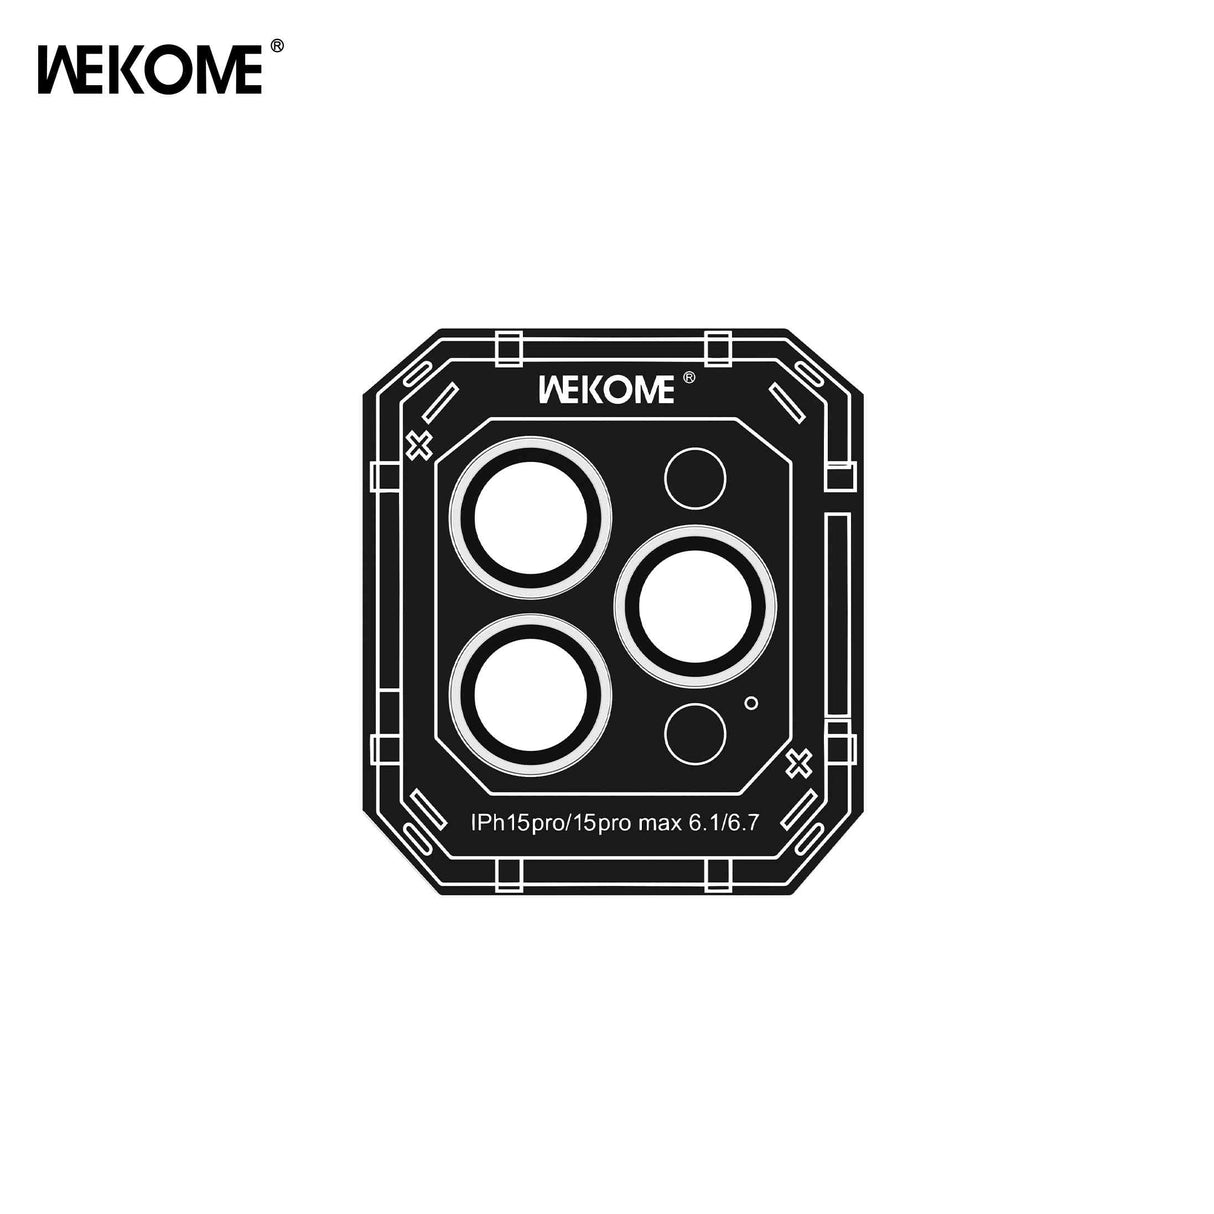 WEKOME WTPC-007 Vacha Series Corning Metal Lens Protector - Clear for Iphone 15 Pro / Pro Max